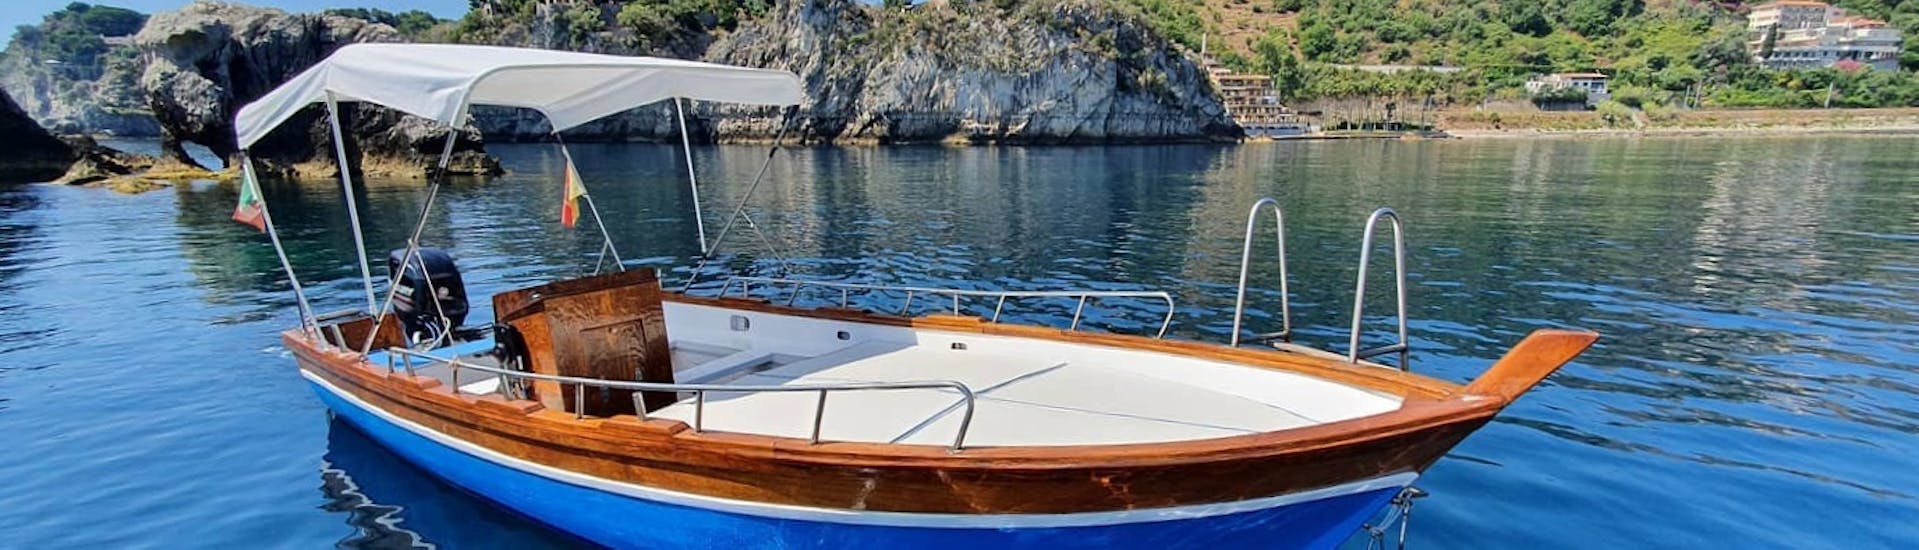 Picture of the boat used for the Boat Trip from Taormina with Wine Tasting with Boat Experience Taormina.